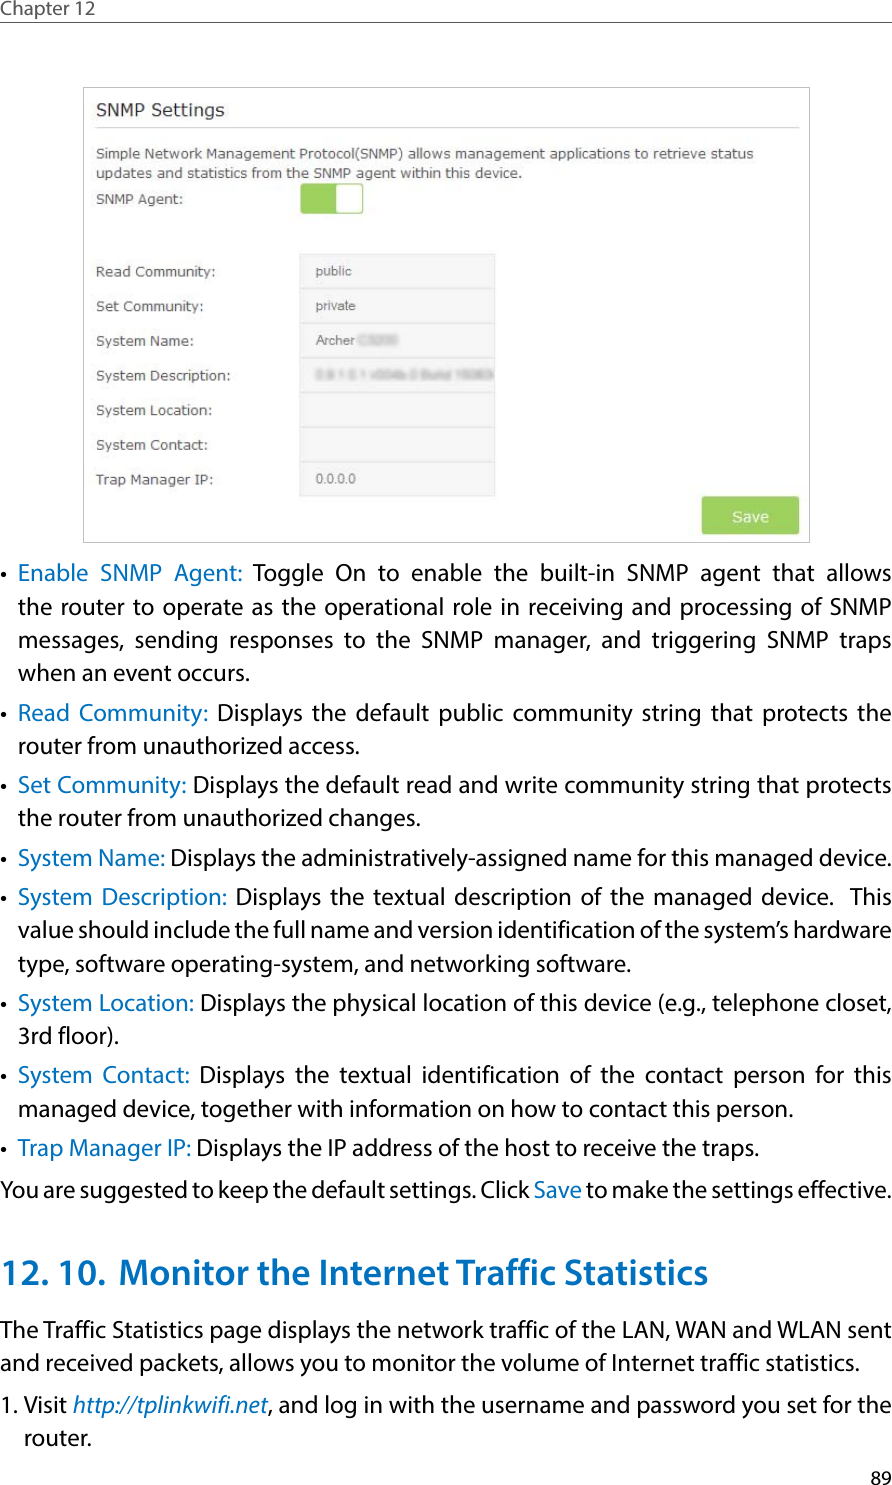 89Chapter 12  •  Enable SNMP Agent: Toggle On to enable the built-in SNMP agent that allows the router to operate as the operational role in receiving and processing of SNMP messages, sending responses to the SNMP manager, and triggering SNMP traps when an event occurs.•  Read Community: Displays the default public community string that protects the router from unauthorized access.•  Set Community: Displays the default read and write community string that protects the router from unauthorized changes.•  System Name: Displays the administratively-assigned name for this managed device.•  System Description: Displays the textual description of the managed device.  This value should include the full name and version identification of the system’s hardware type, software operating-system, and networking software.•  System Location: Displays the physical location of this device (e.g., telephone closet, 3rd floor).  •  System Contact: Displays the textual identification of the contact person for this managed device, together with information on how to contact this person.•  Trap Manager IP: Displays the IP address of the host to receive the traps.You are suggested to keep the default settings. Click Save to make the settings effective.12. 10.  Monitor the Internet Traffic StatisticsThe Traffic Statistics page displays the network traffic of the LAN, WAN and WLAN sent and received packets, allows you to monitor the volume of Internet traffic statistics.1. Visit http://tplinkwifi.net, and log in with the username and password you set for the router.